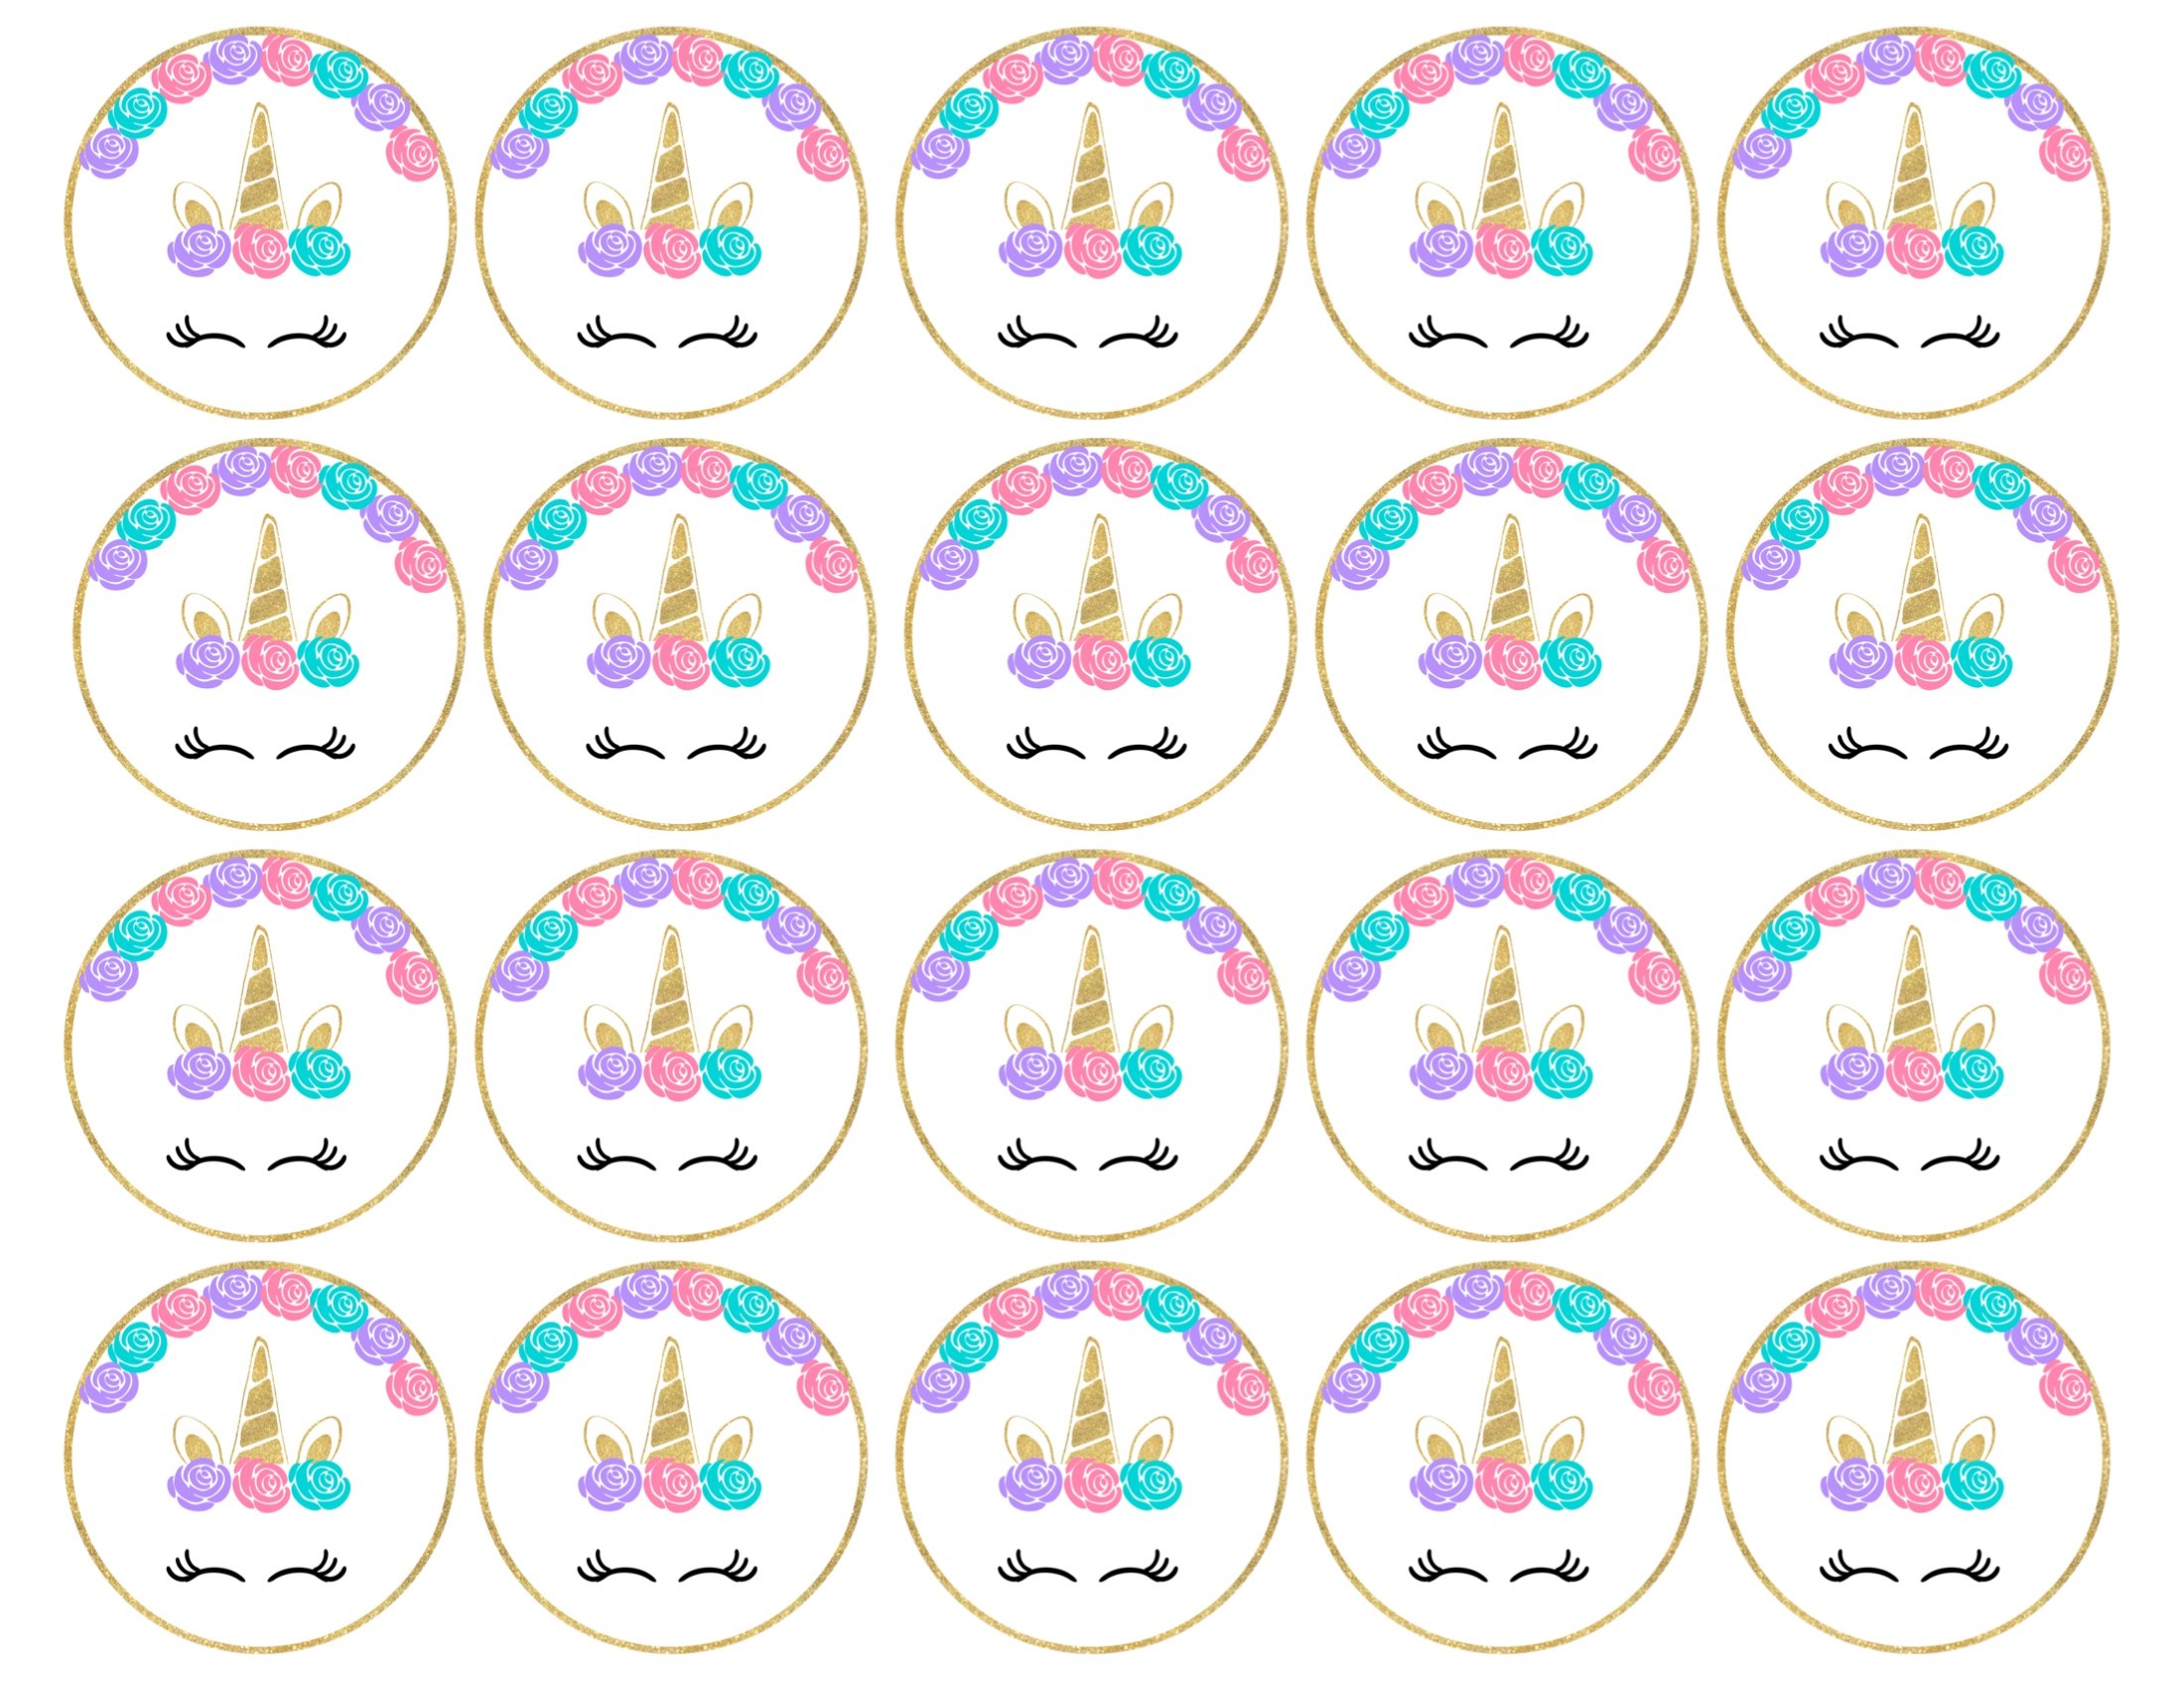 Free Printable Unicorn Cupcake Toppers - Paper Trail Design - Free Printable Unicorn Cupcake Toppers